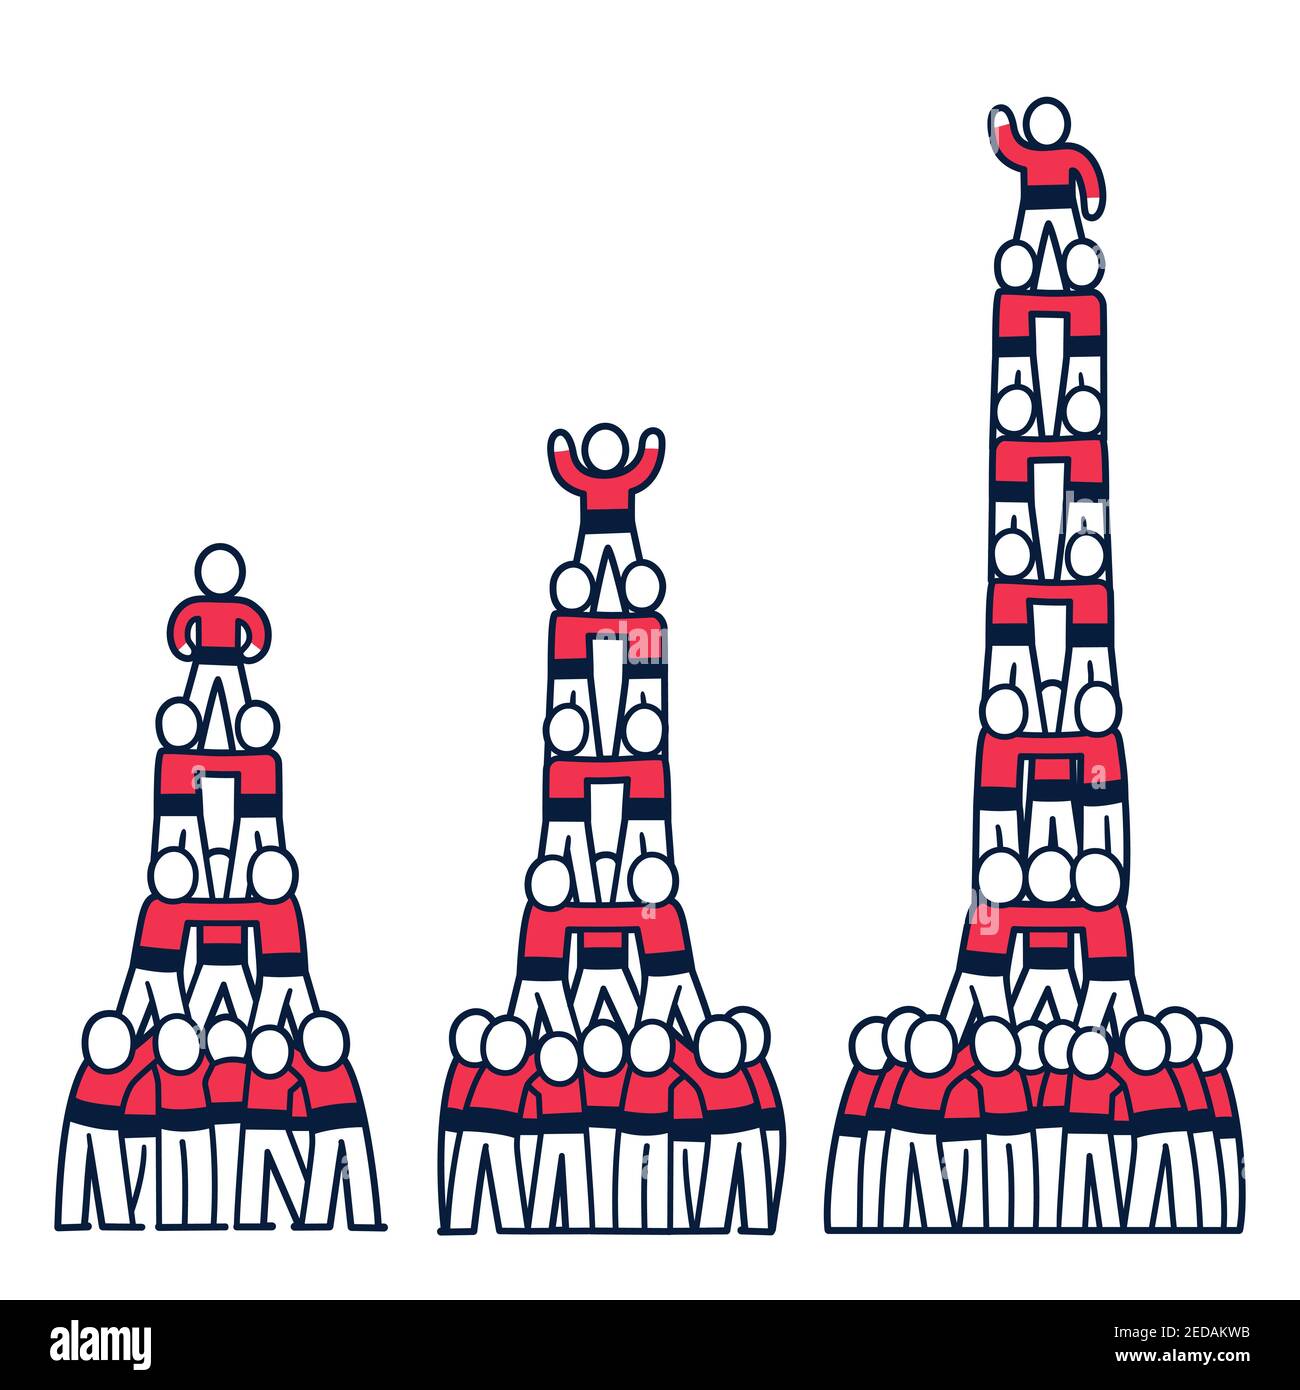 Castell drawing, human tower traditional in Catalonia. Simple cartoon people building pyramid, 3 heights. Isolated vector clip art illustration. Stock Vector